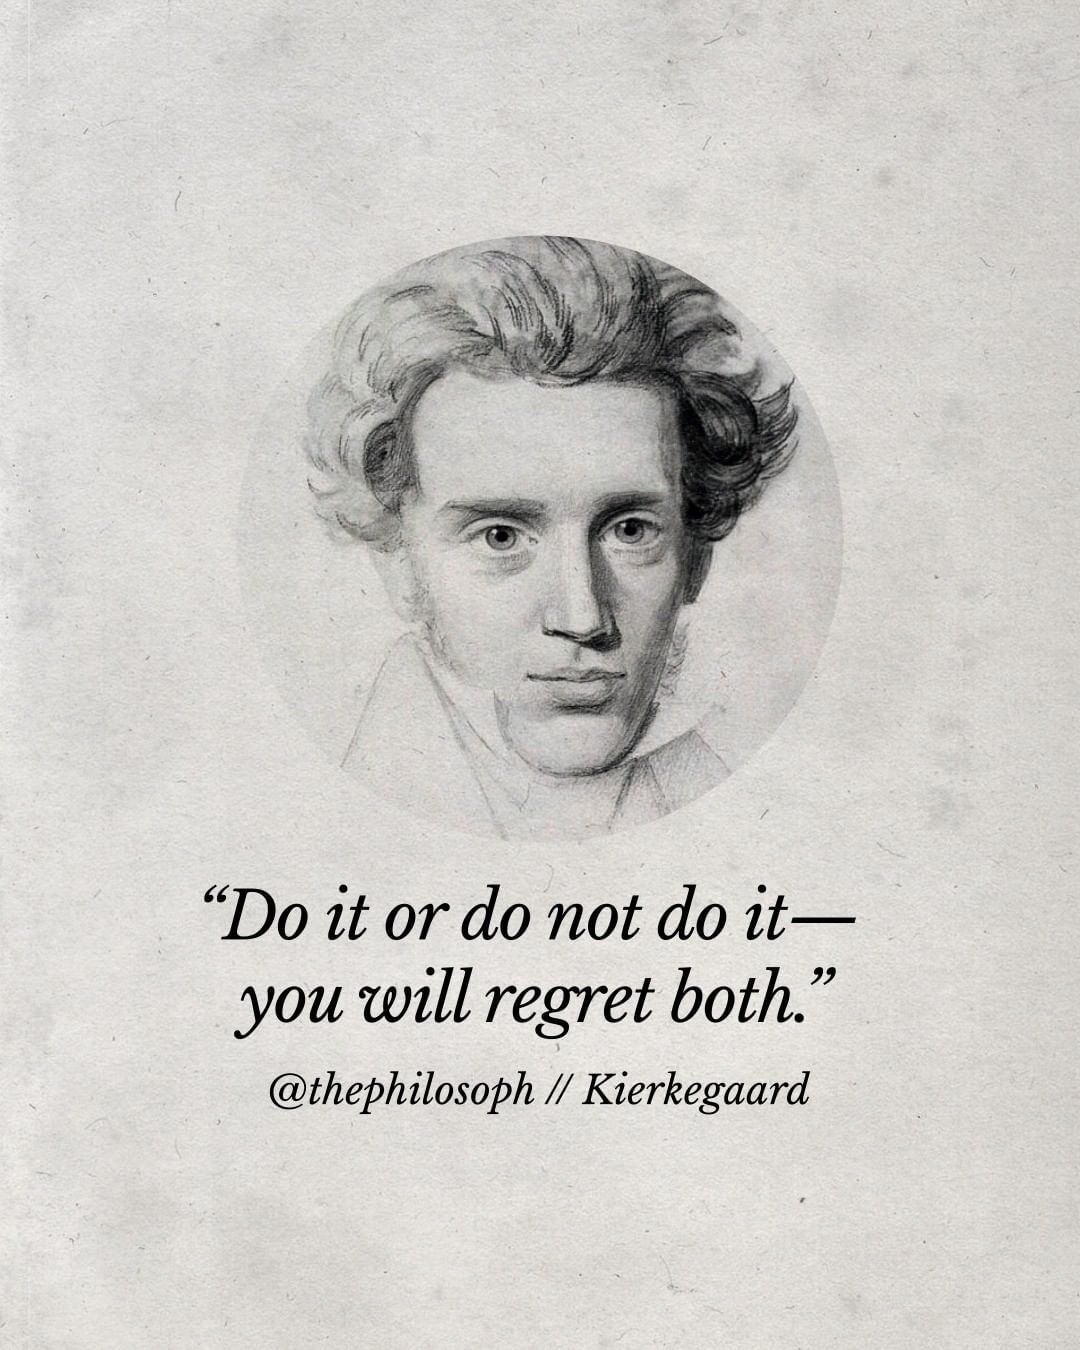 Do it or don’t do it — you will regret both.